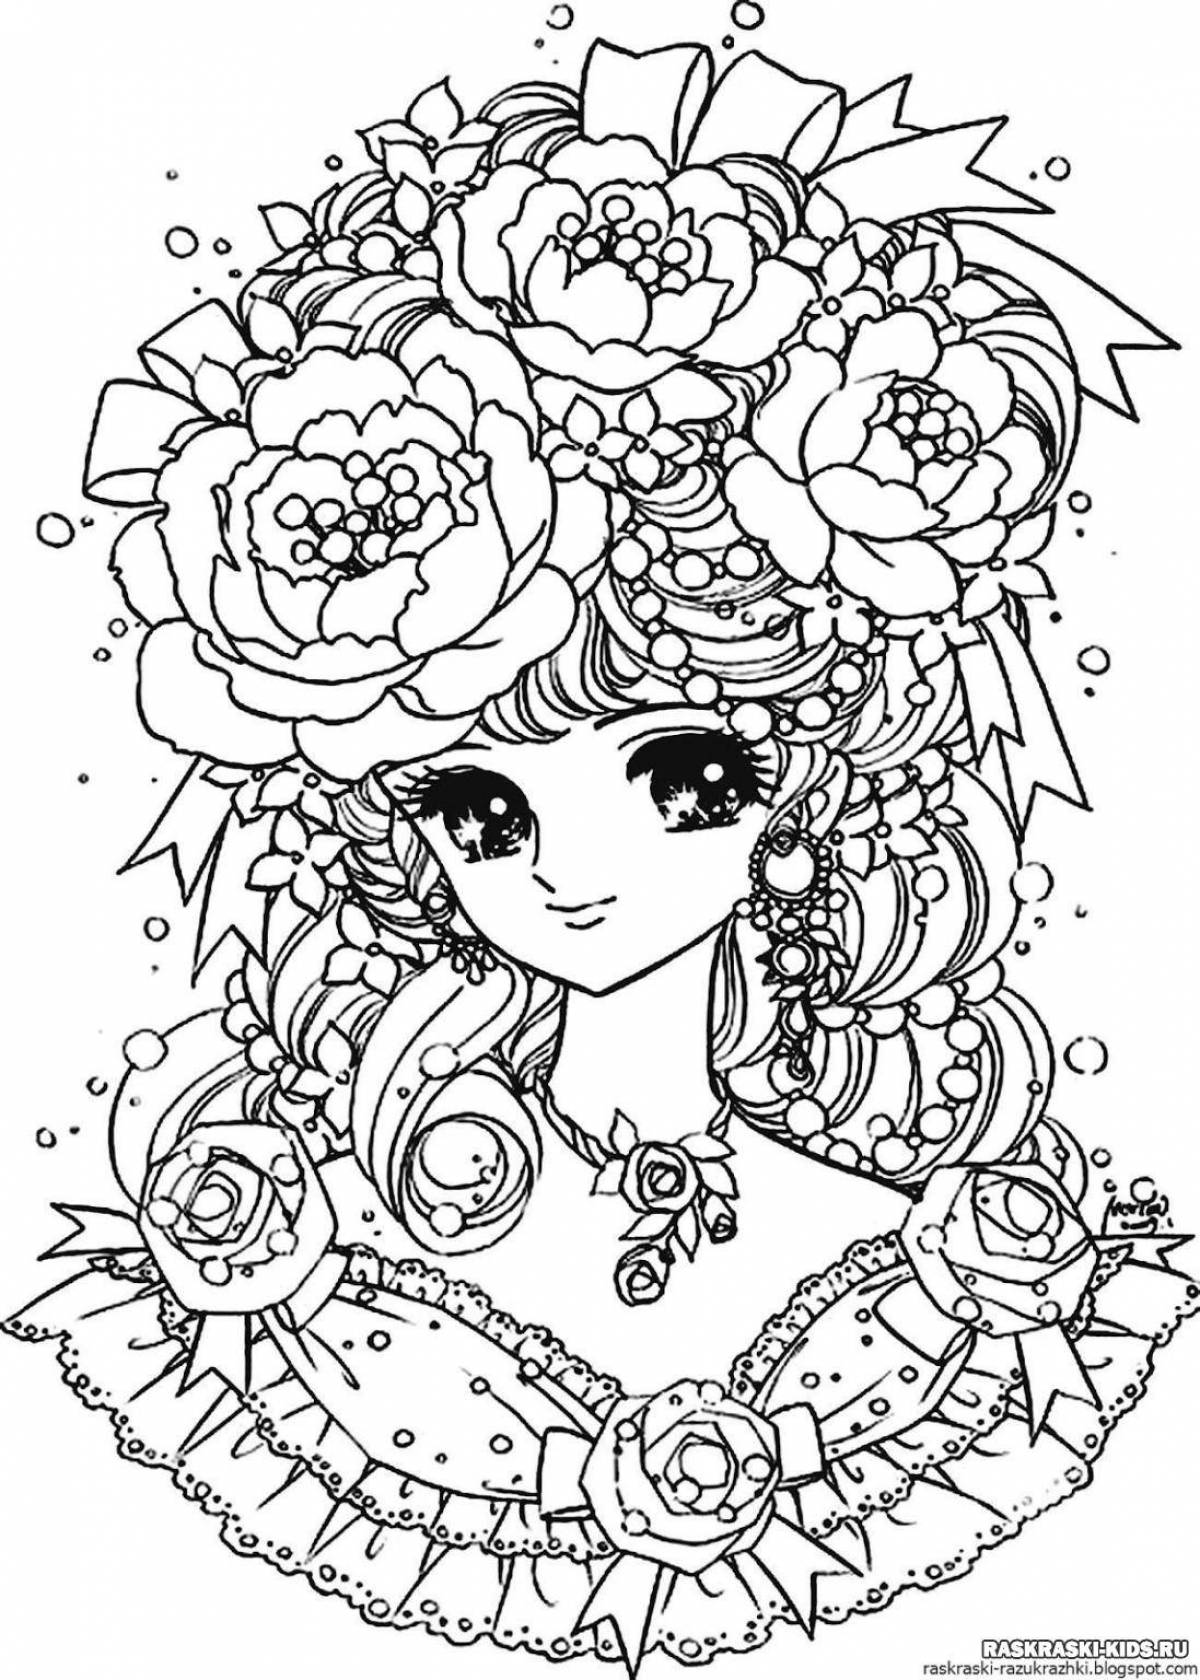 Luminous coloring book for girls 10-12 years old